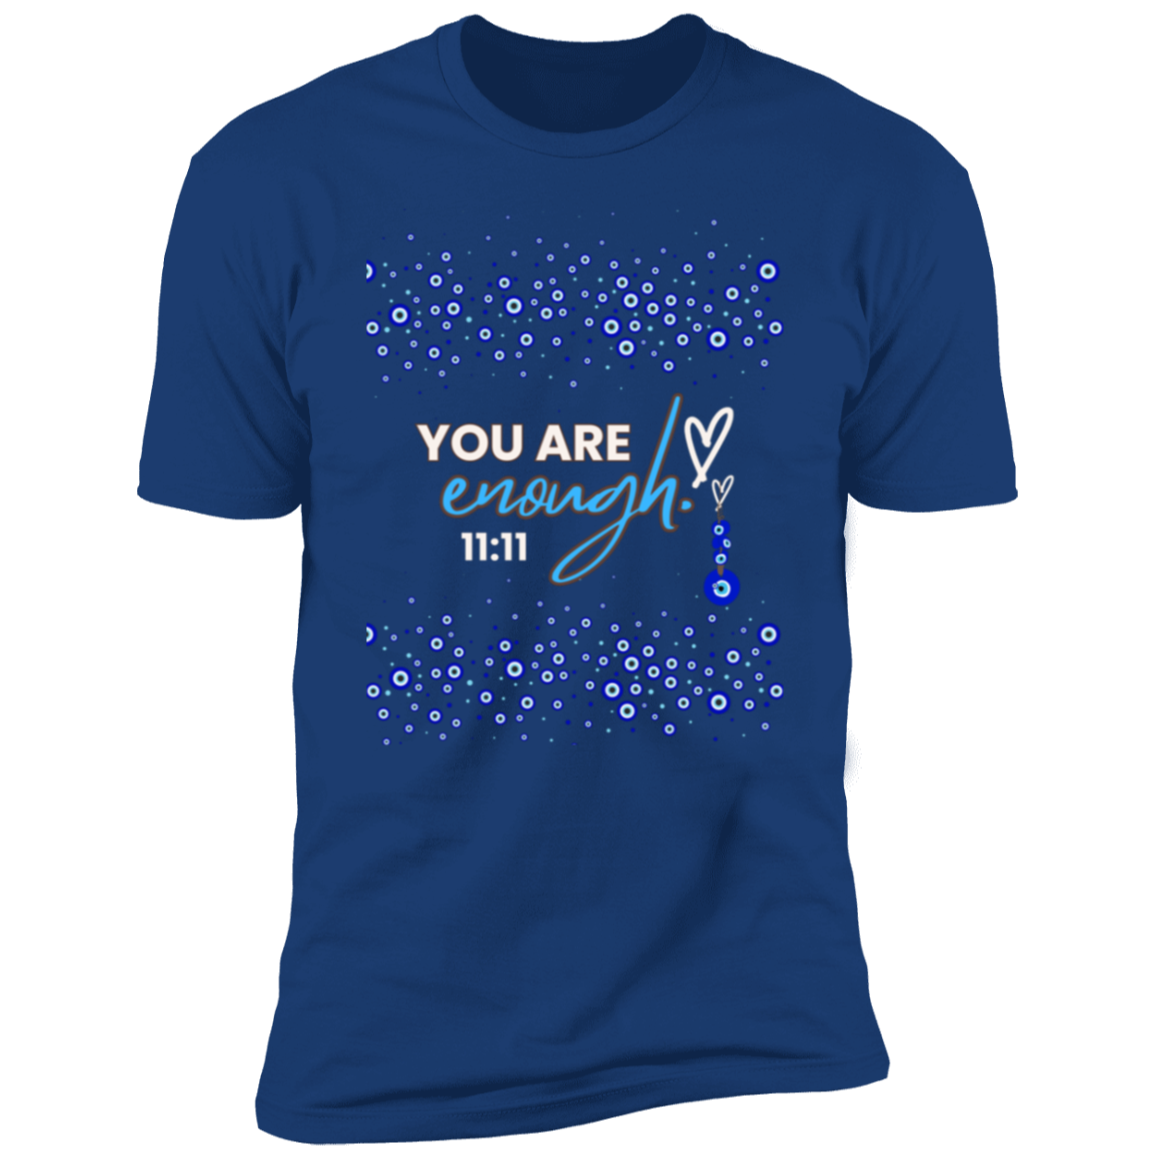 1111 You are enough! Premium Short Sleeve T-Shirt